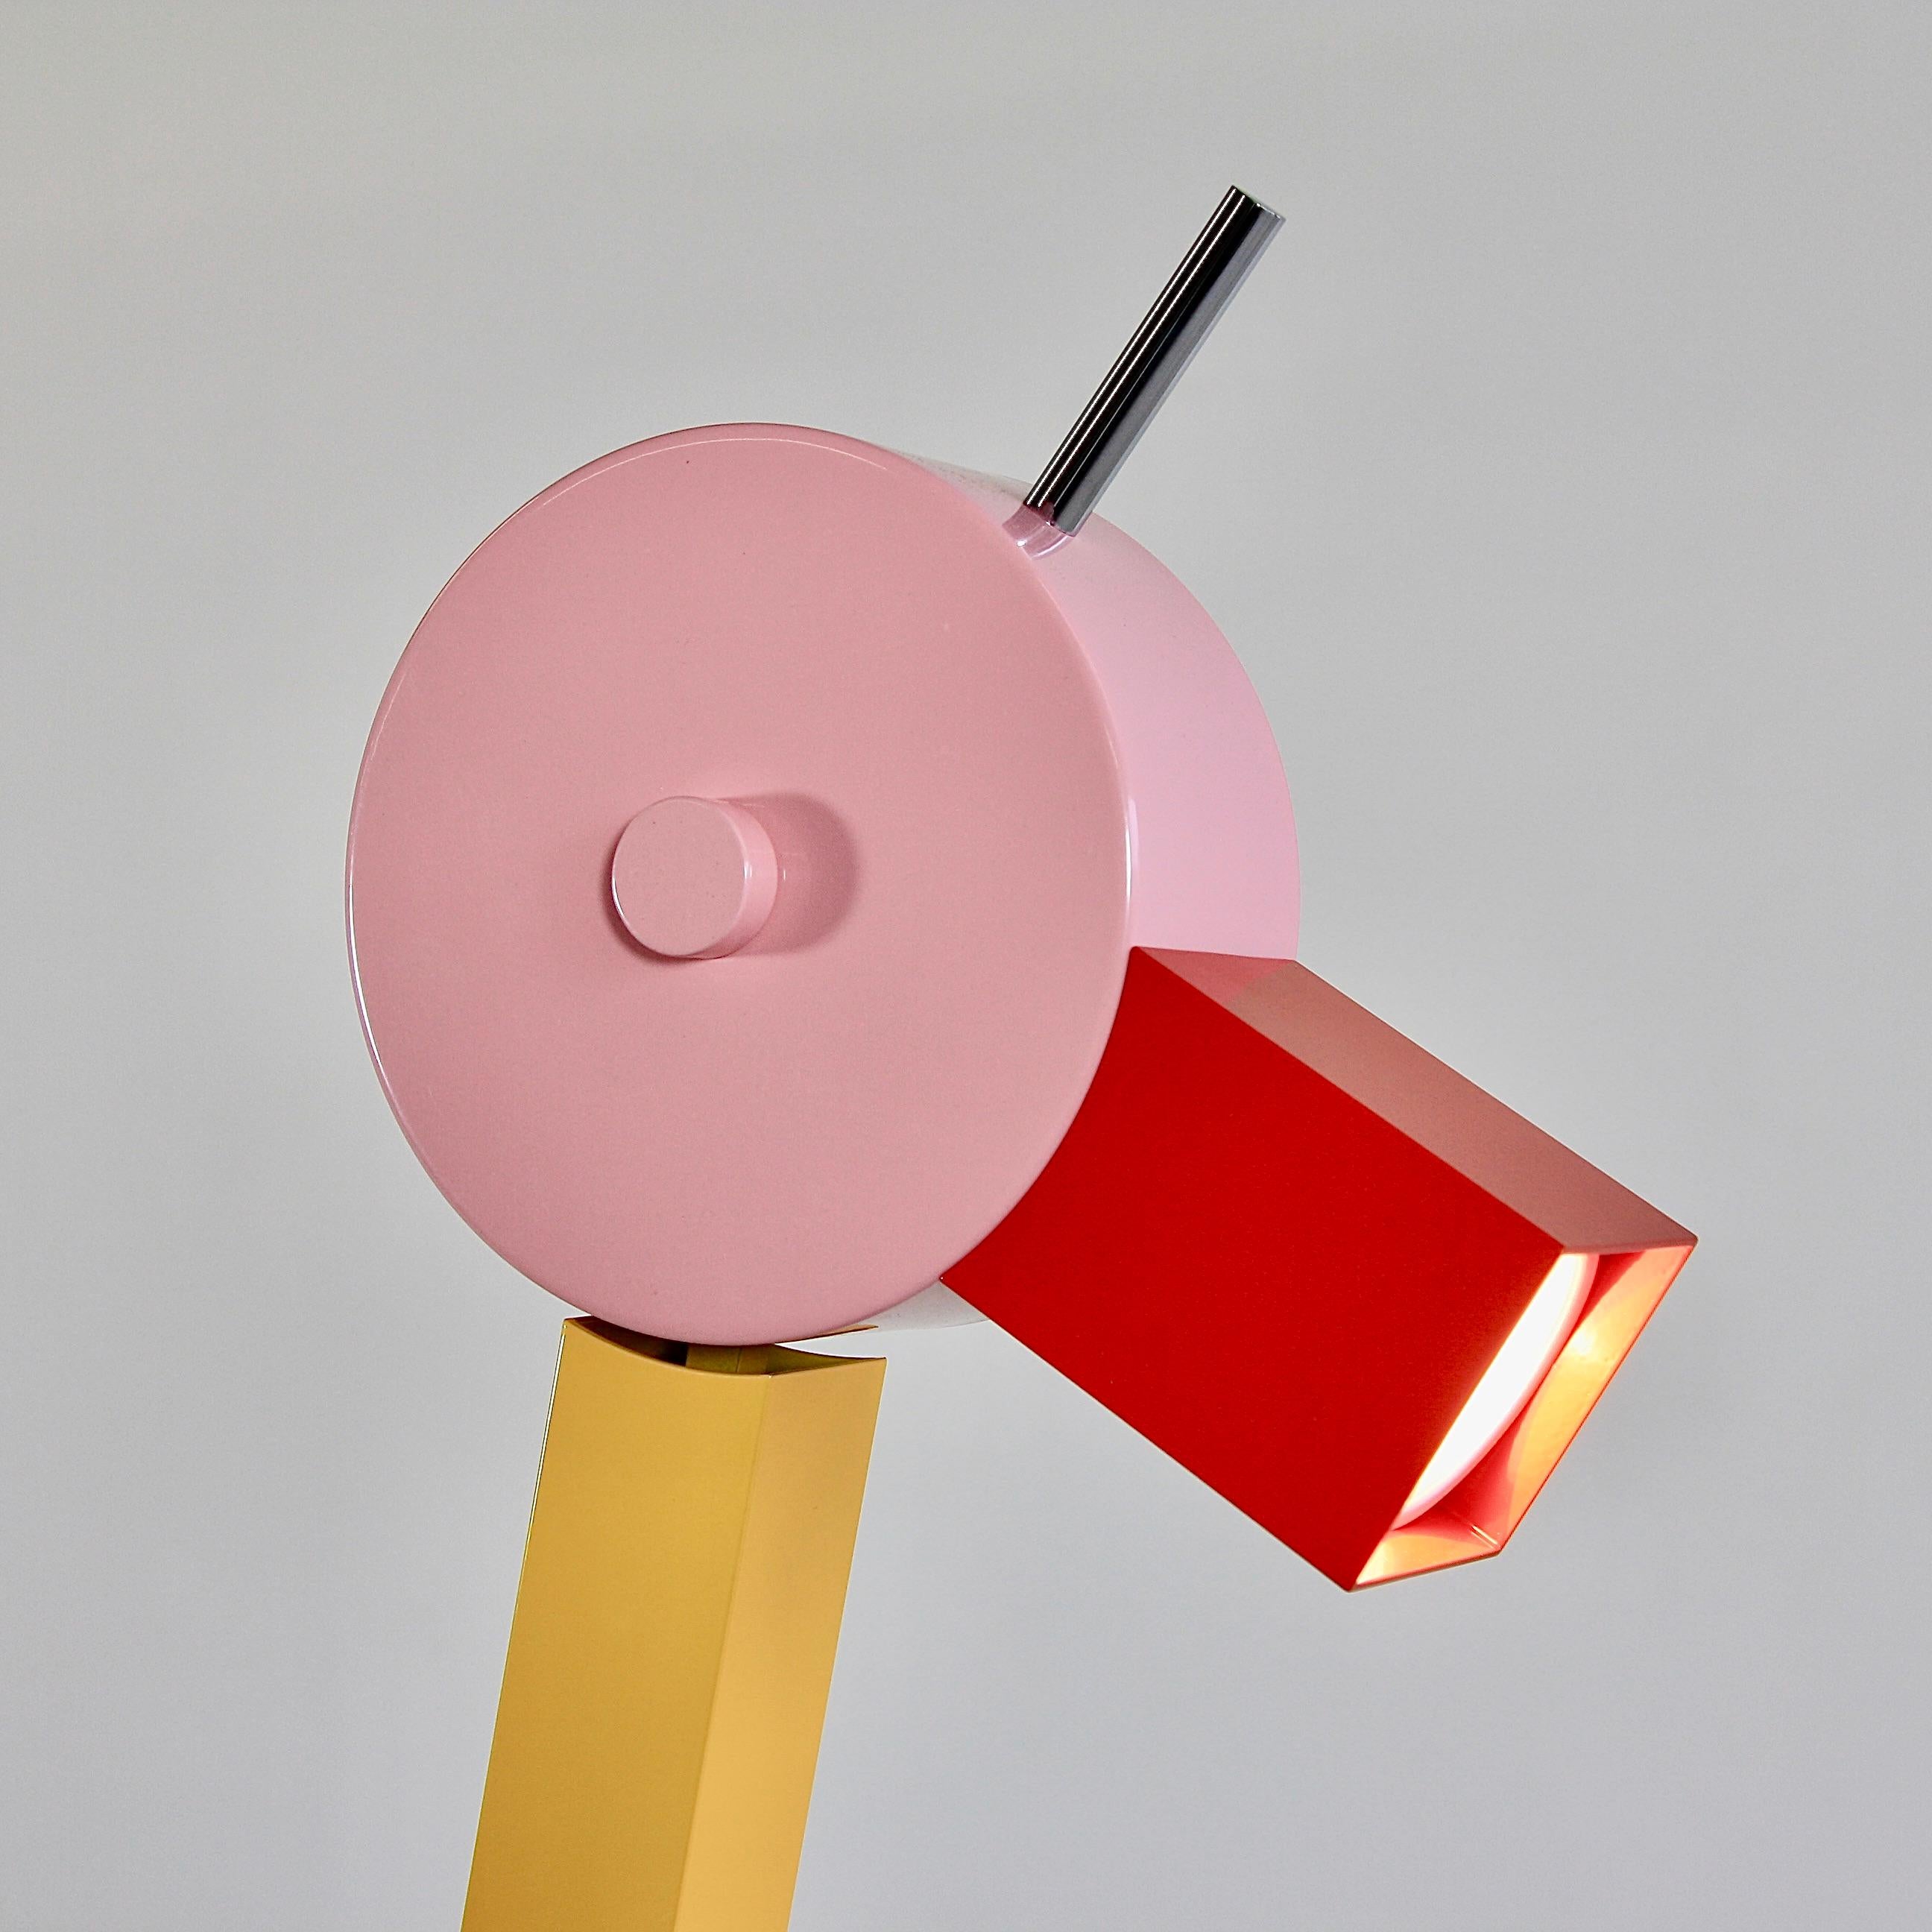 Tahiti table lamp, designed by Ettore Sottsass, Italy, 1981.

Metal construction, wooden base with laminate and head with halogen lamp, 'The Duck'. With original metal label.

Reference: Fiell. 1000 lights. 1960 to present. P. 316,